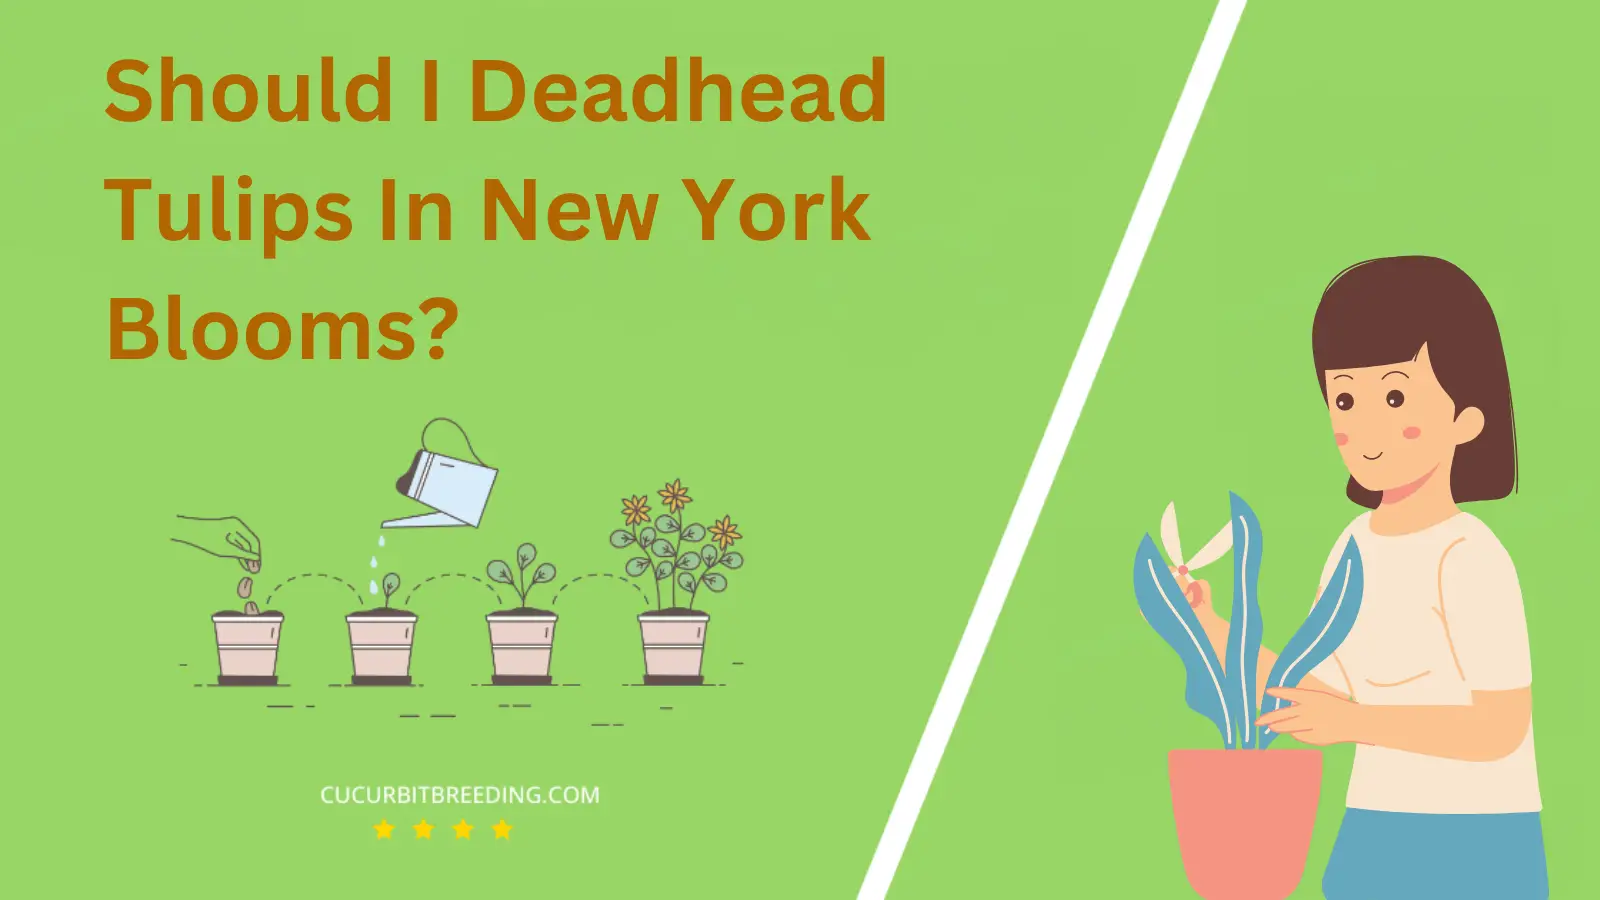 Should I Deadhead Tulips In New York Blooms?